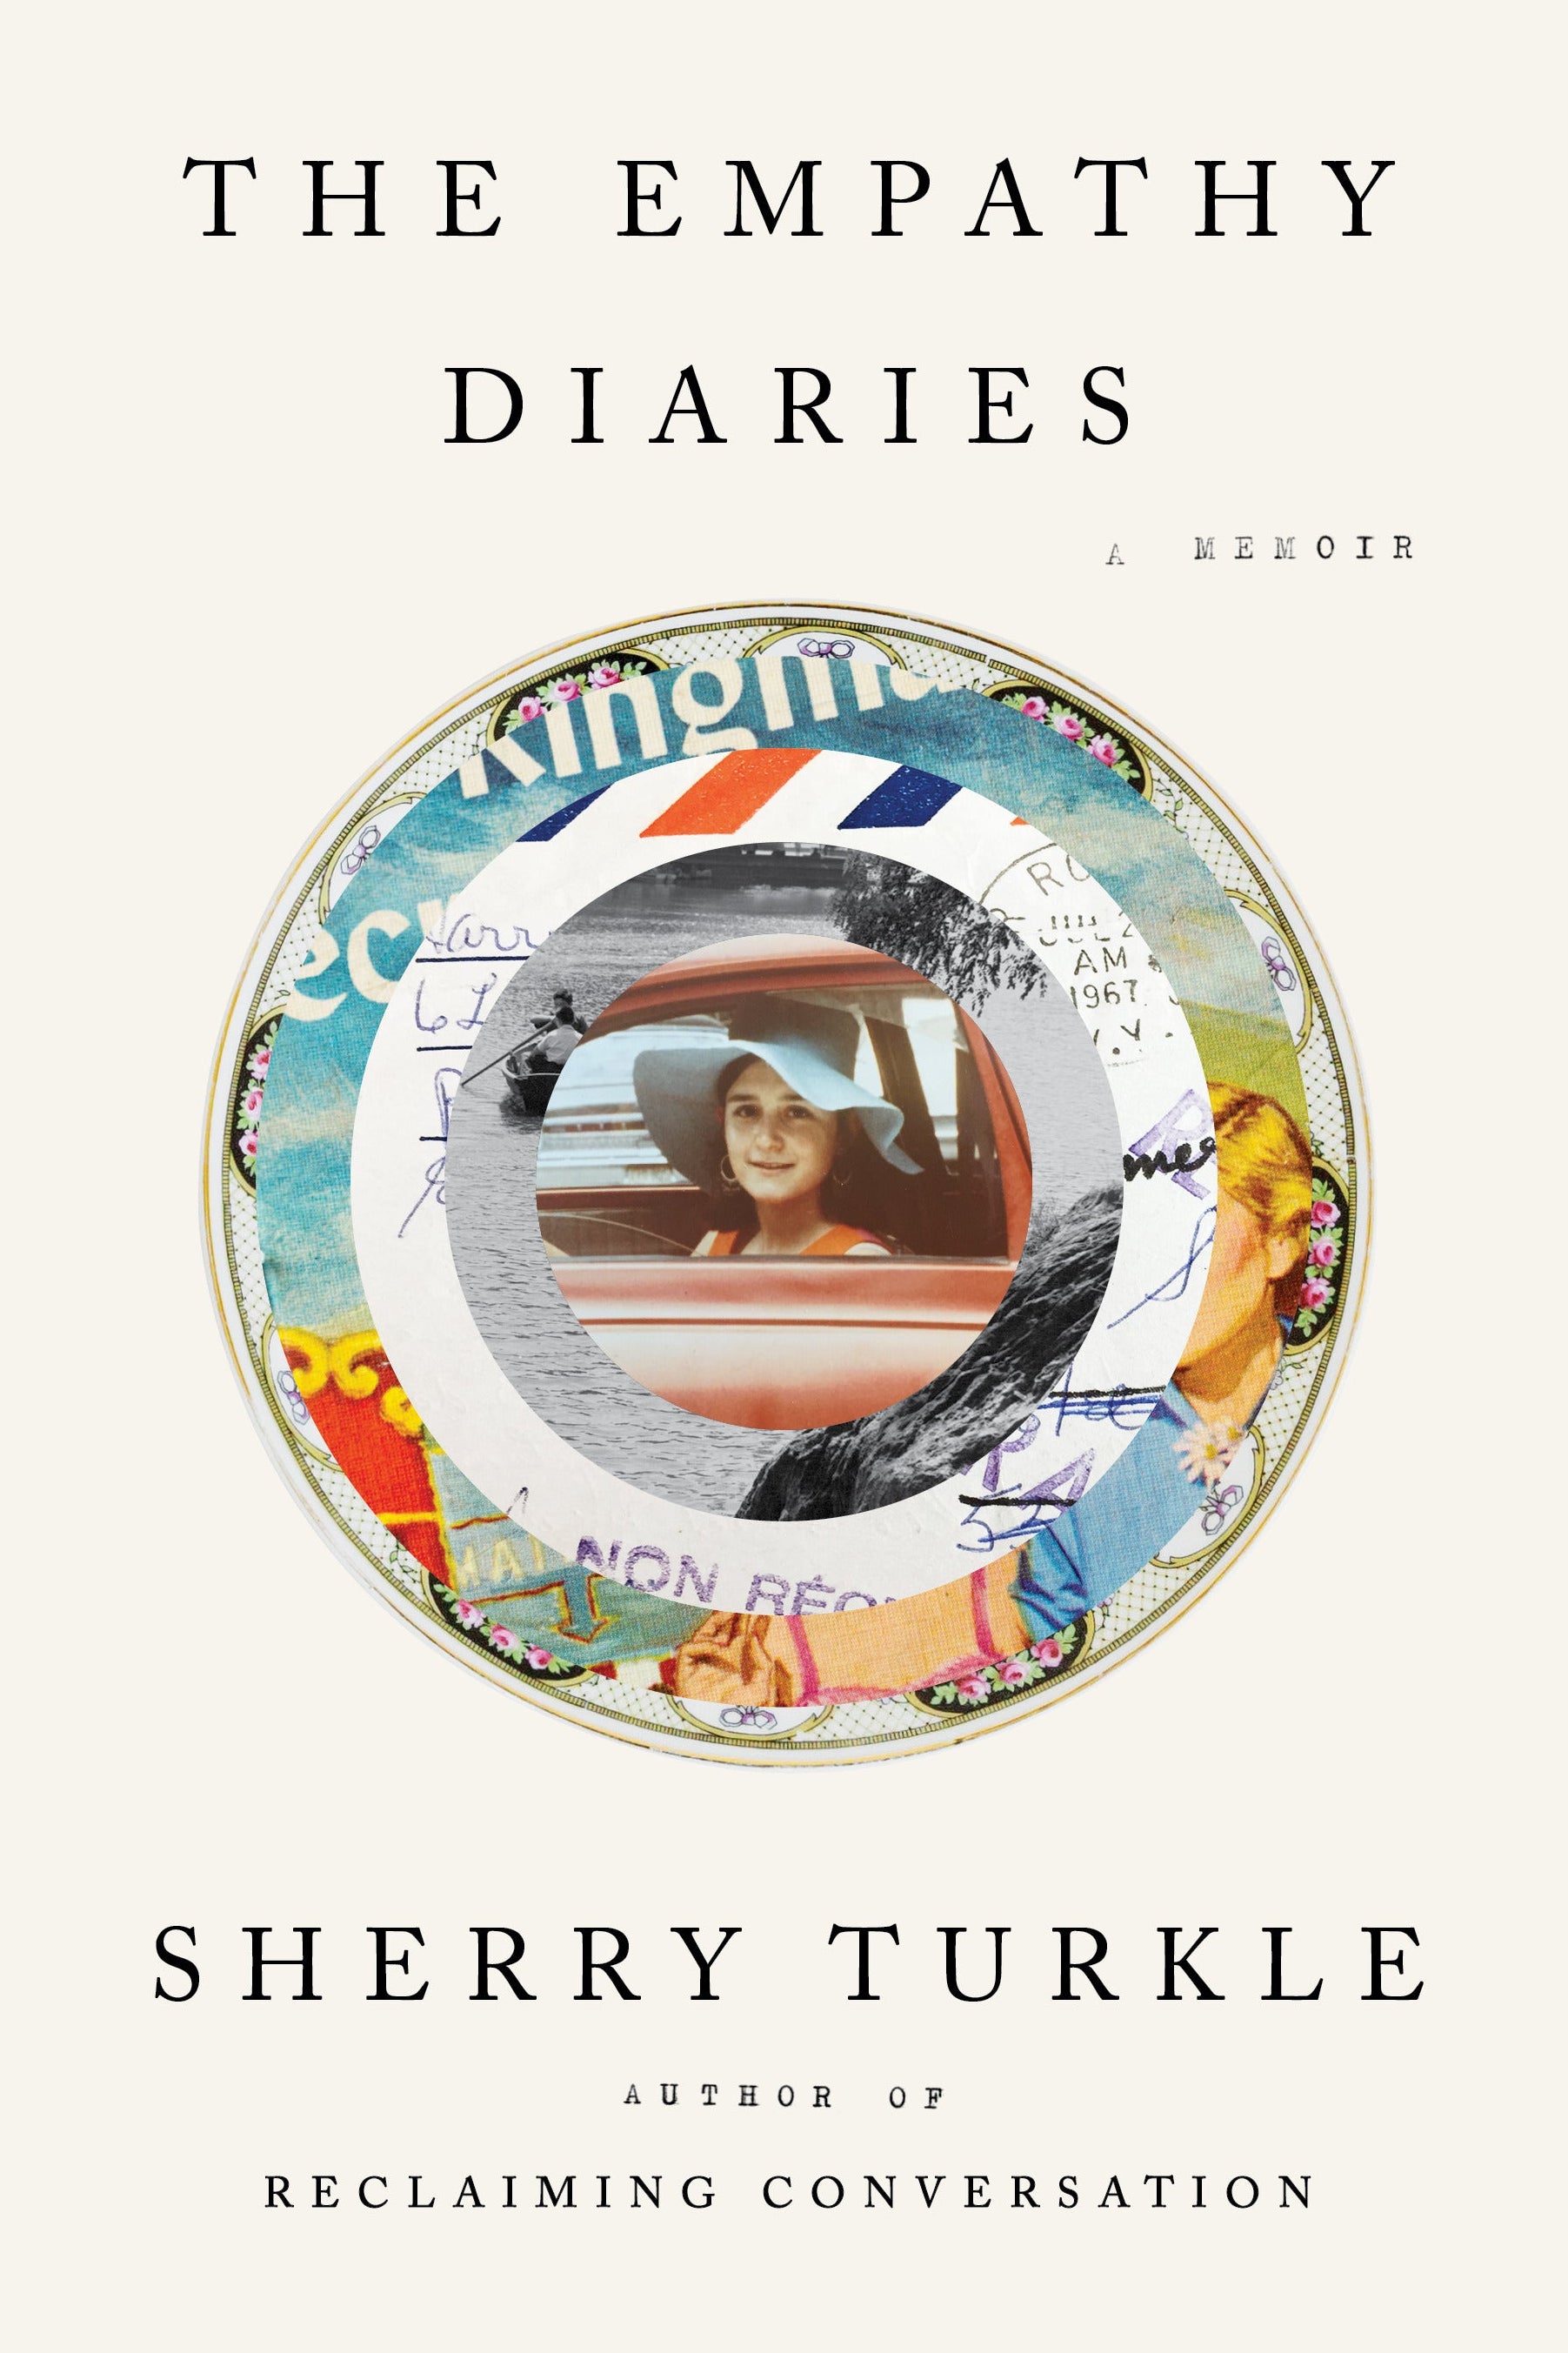 The book cover of The Empathy Diaries